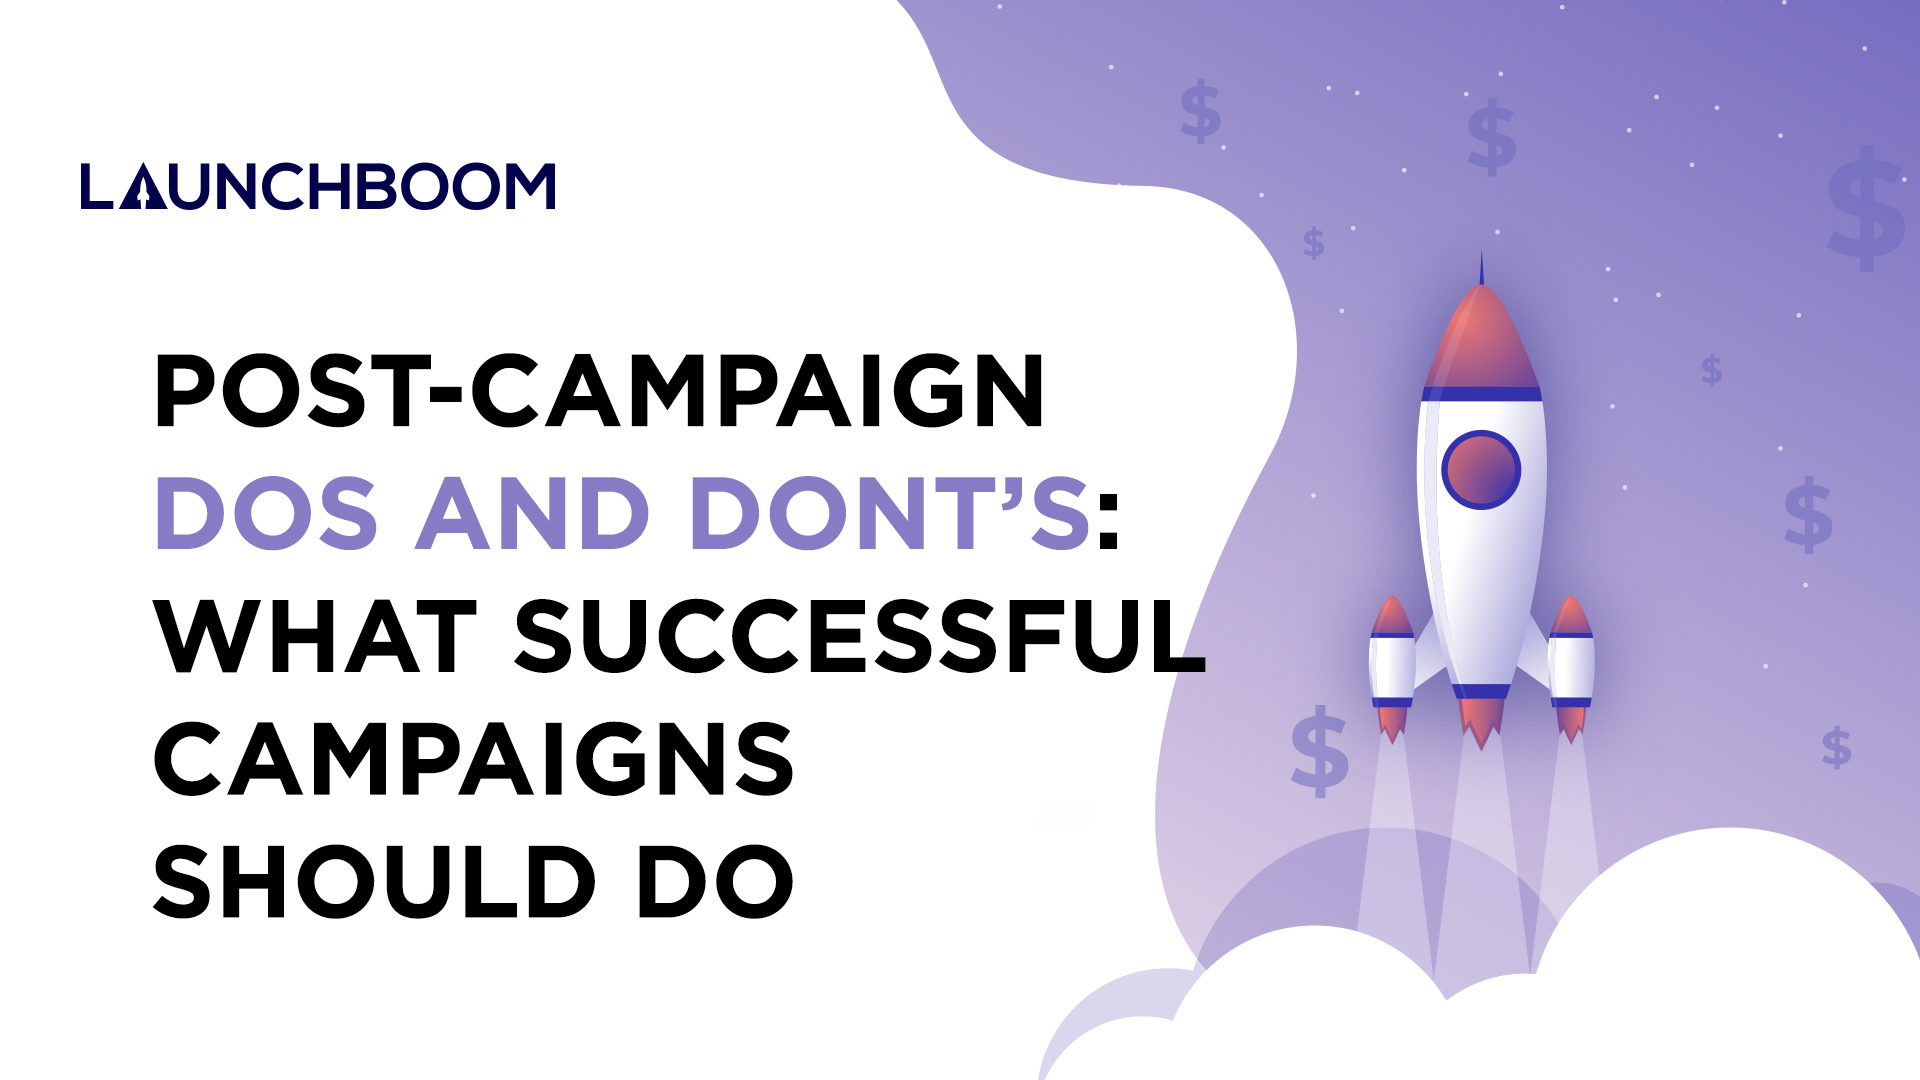 Post-campaign dos and don’ts: What successful campaigns should do